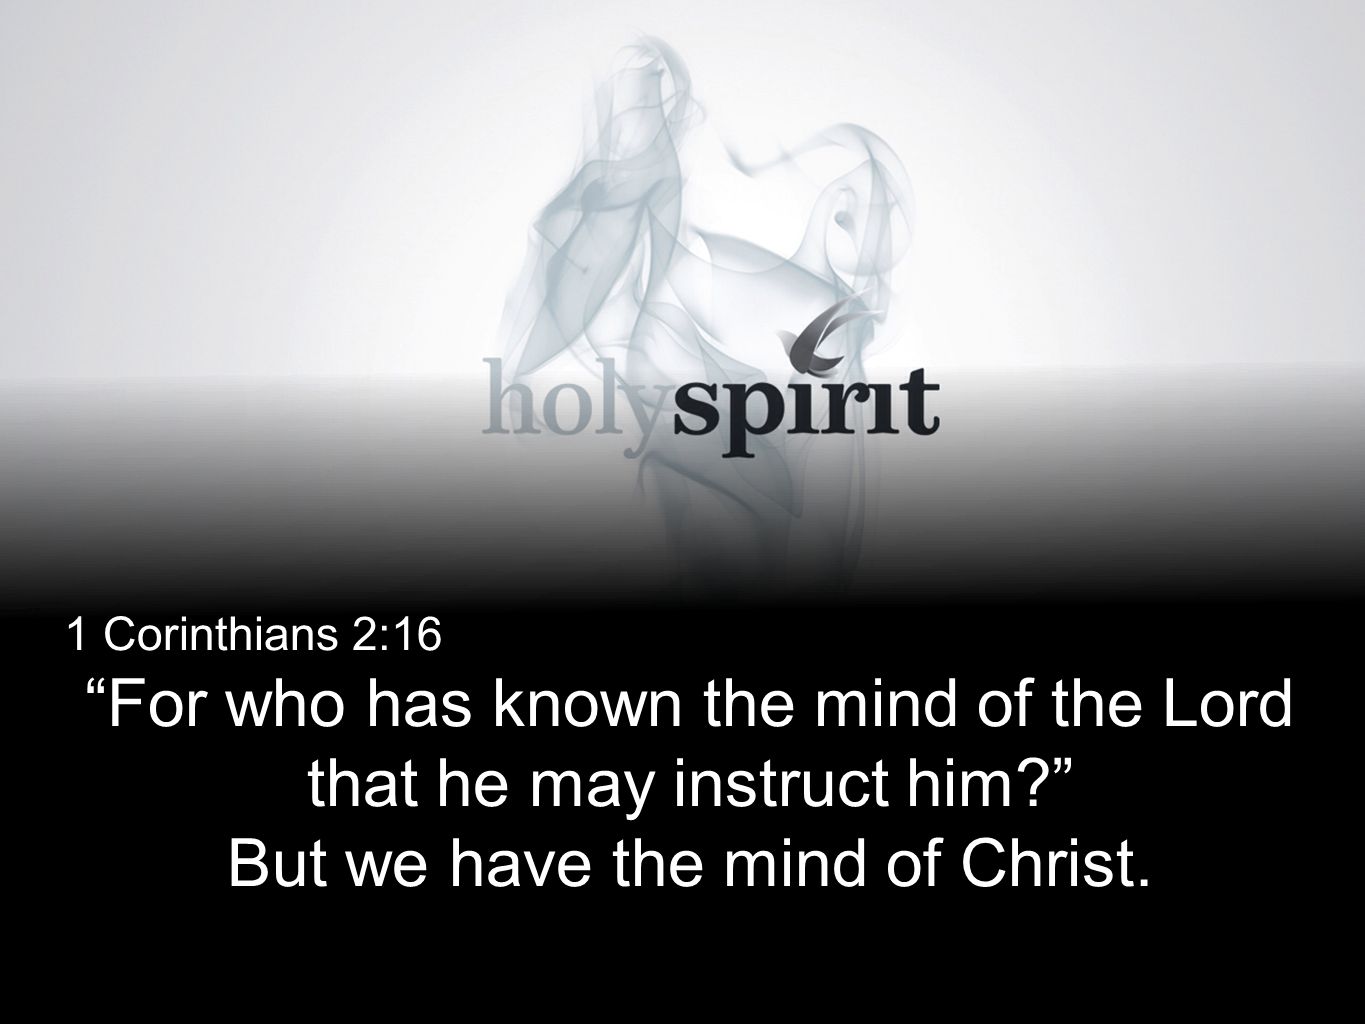 For who has known the mind of the Lord that he may instruct him